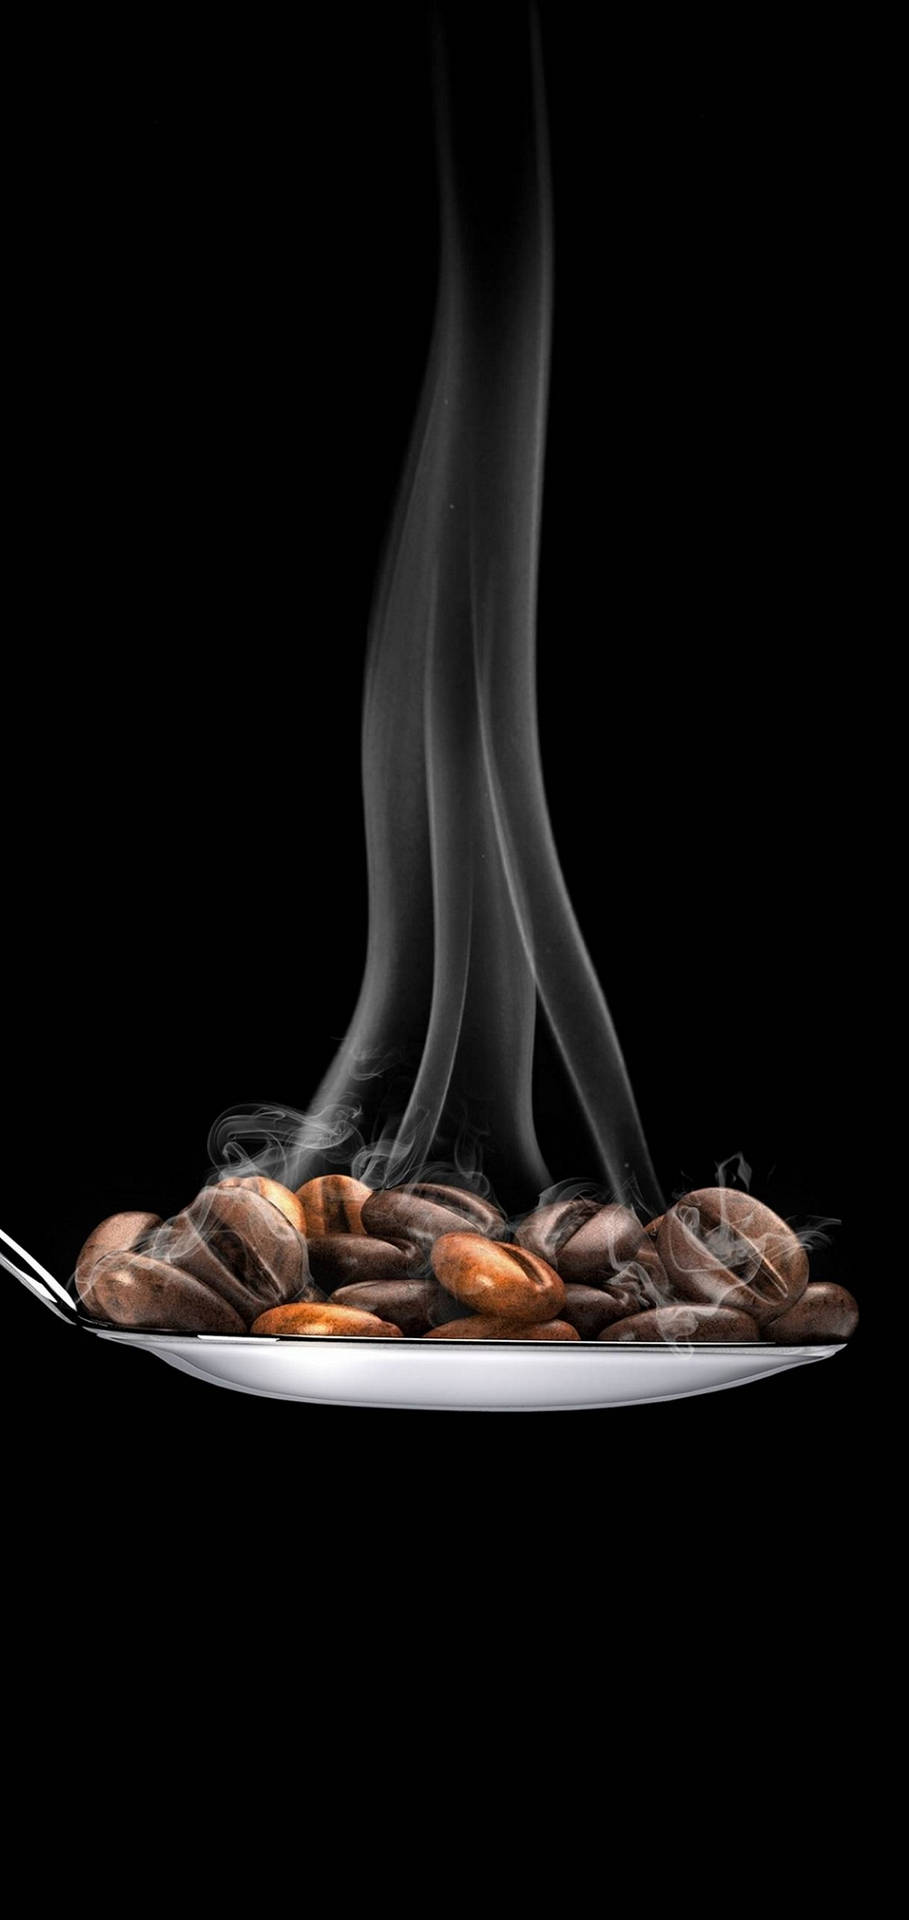 Spoon Holding Coffee Beans Wallpaper